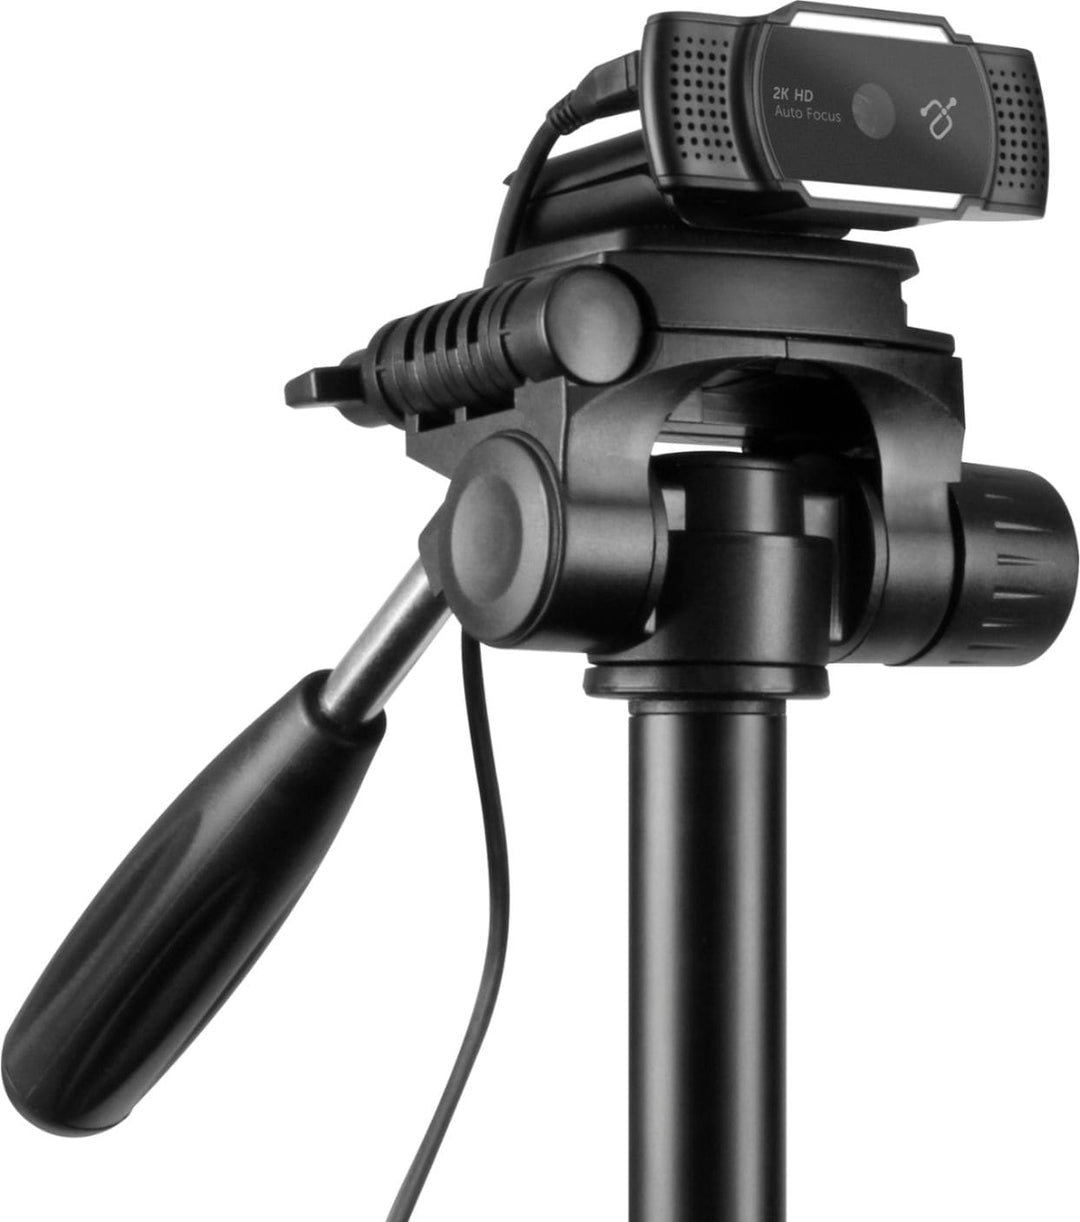 Aluratek - Live Ultra 2K HD 2560 x 1600 Webcam with Auto Focus and Dual Stereo Noise Cancelling Mics - Black_5